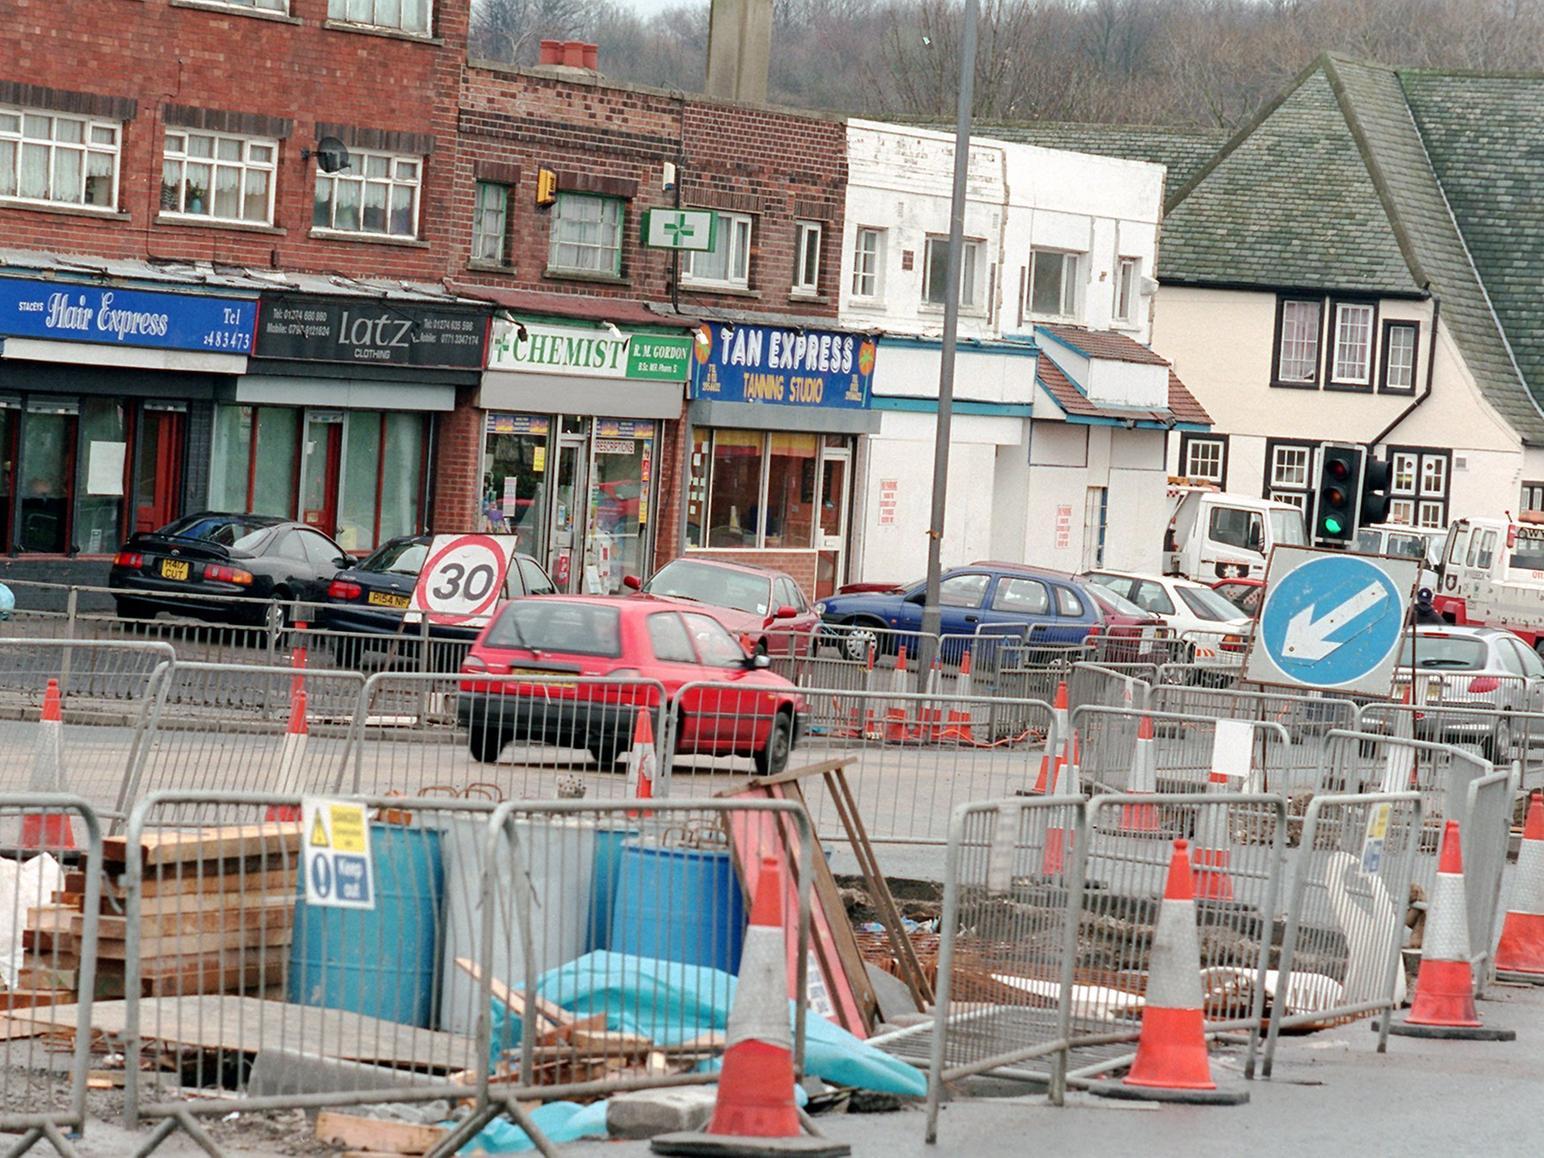 Traders on Selby Road in Halton were upset that the work on the East Leeds Bus Initiative was damaging trade.